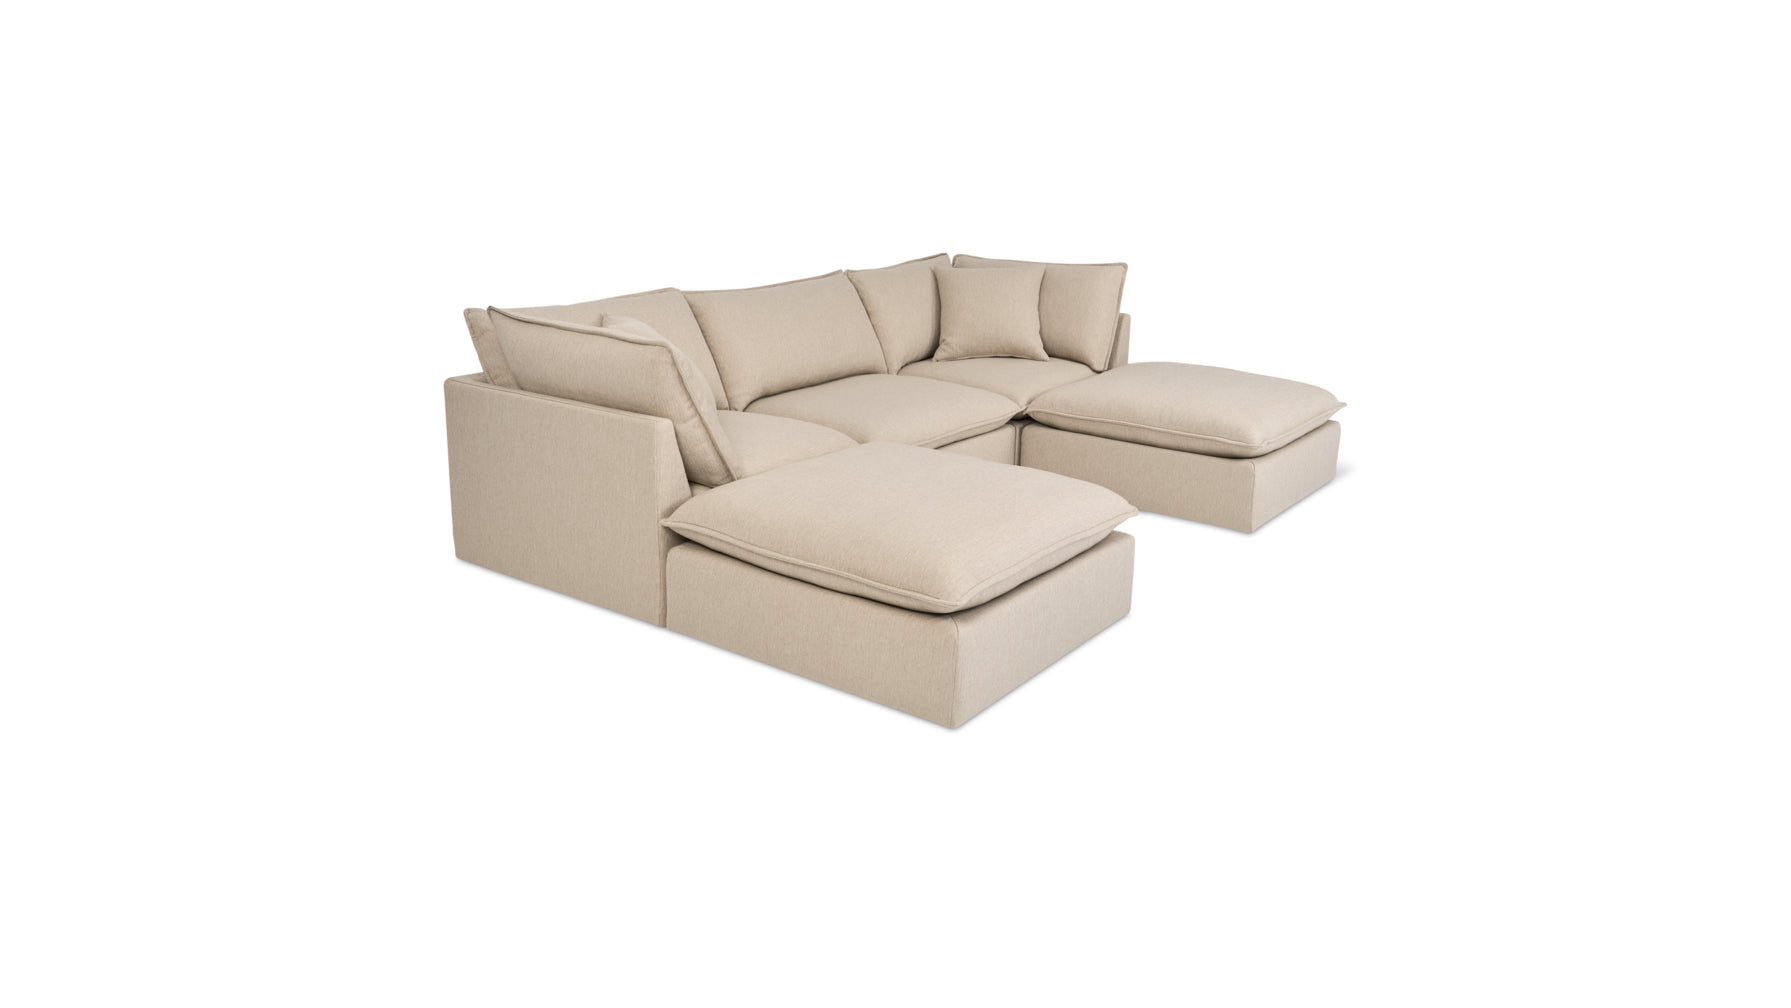 Chill Time 5-Piece Modular U-Shaped Sectional, Biscuit - Image 2